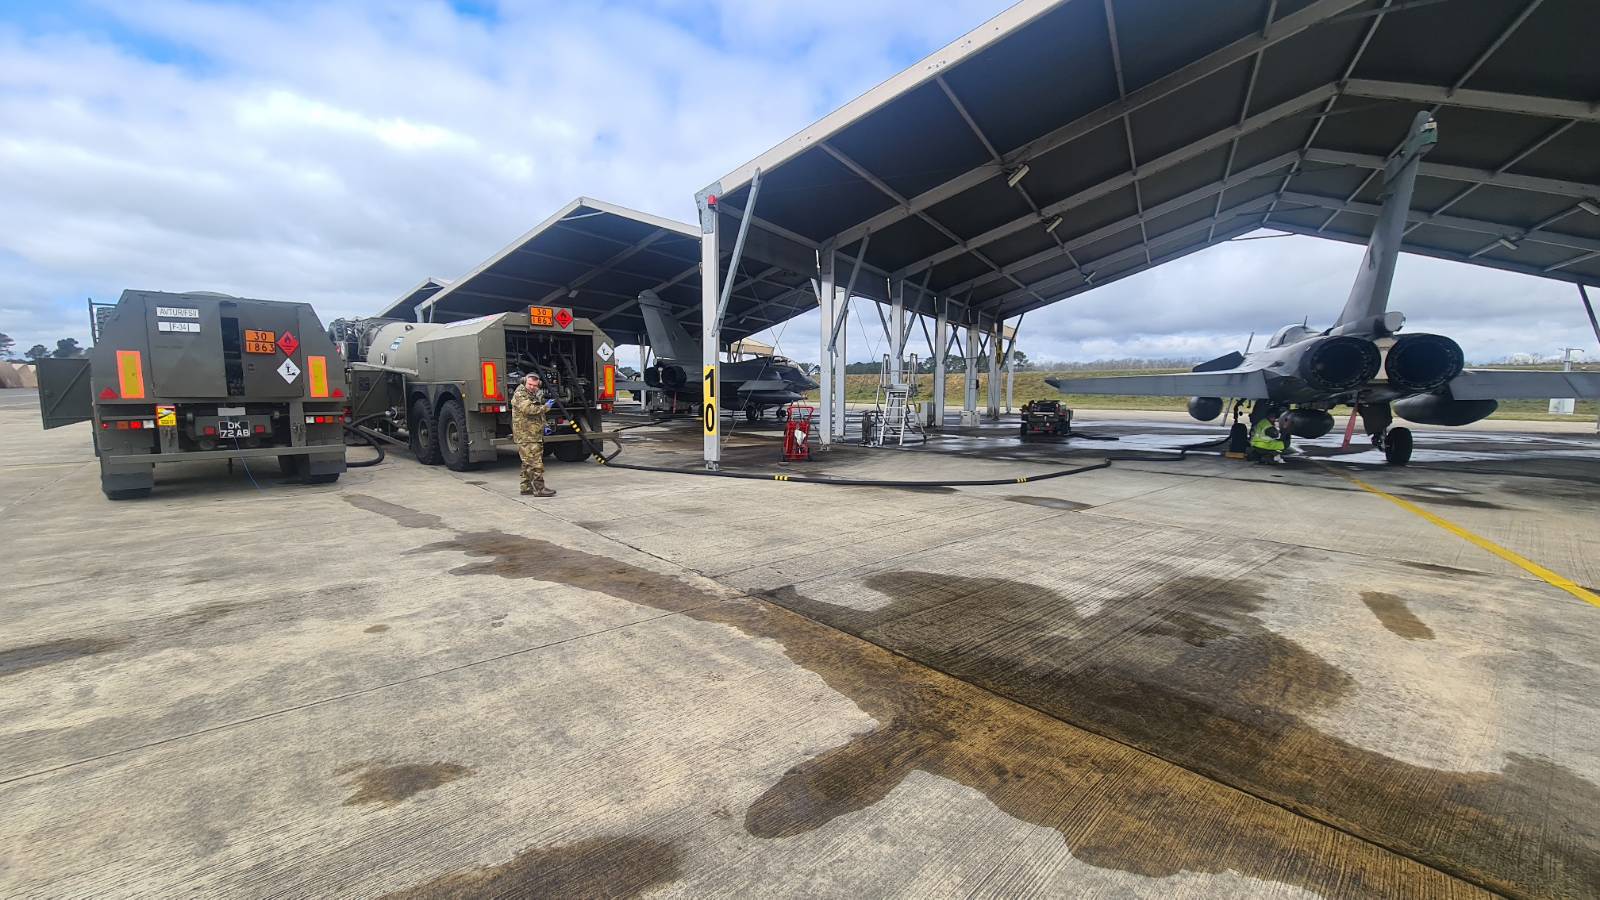 Aircraft being refuelled on the ground